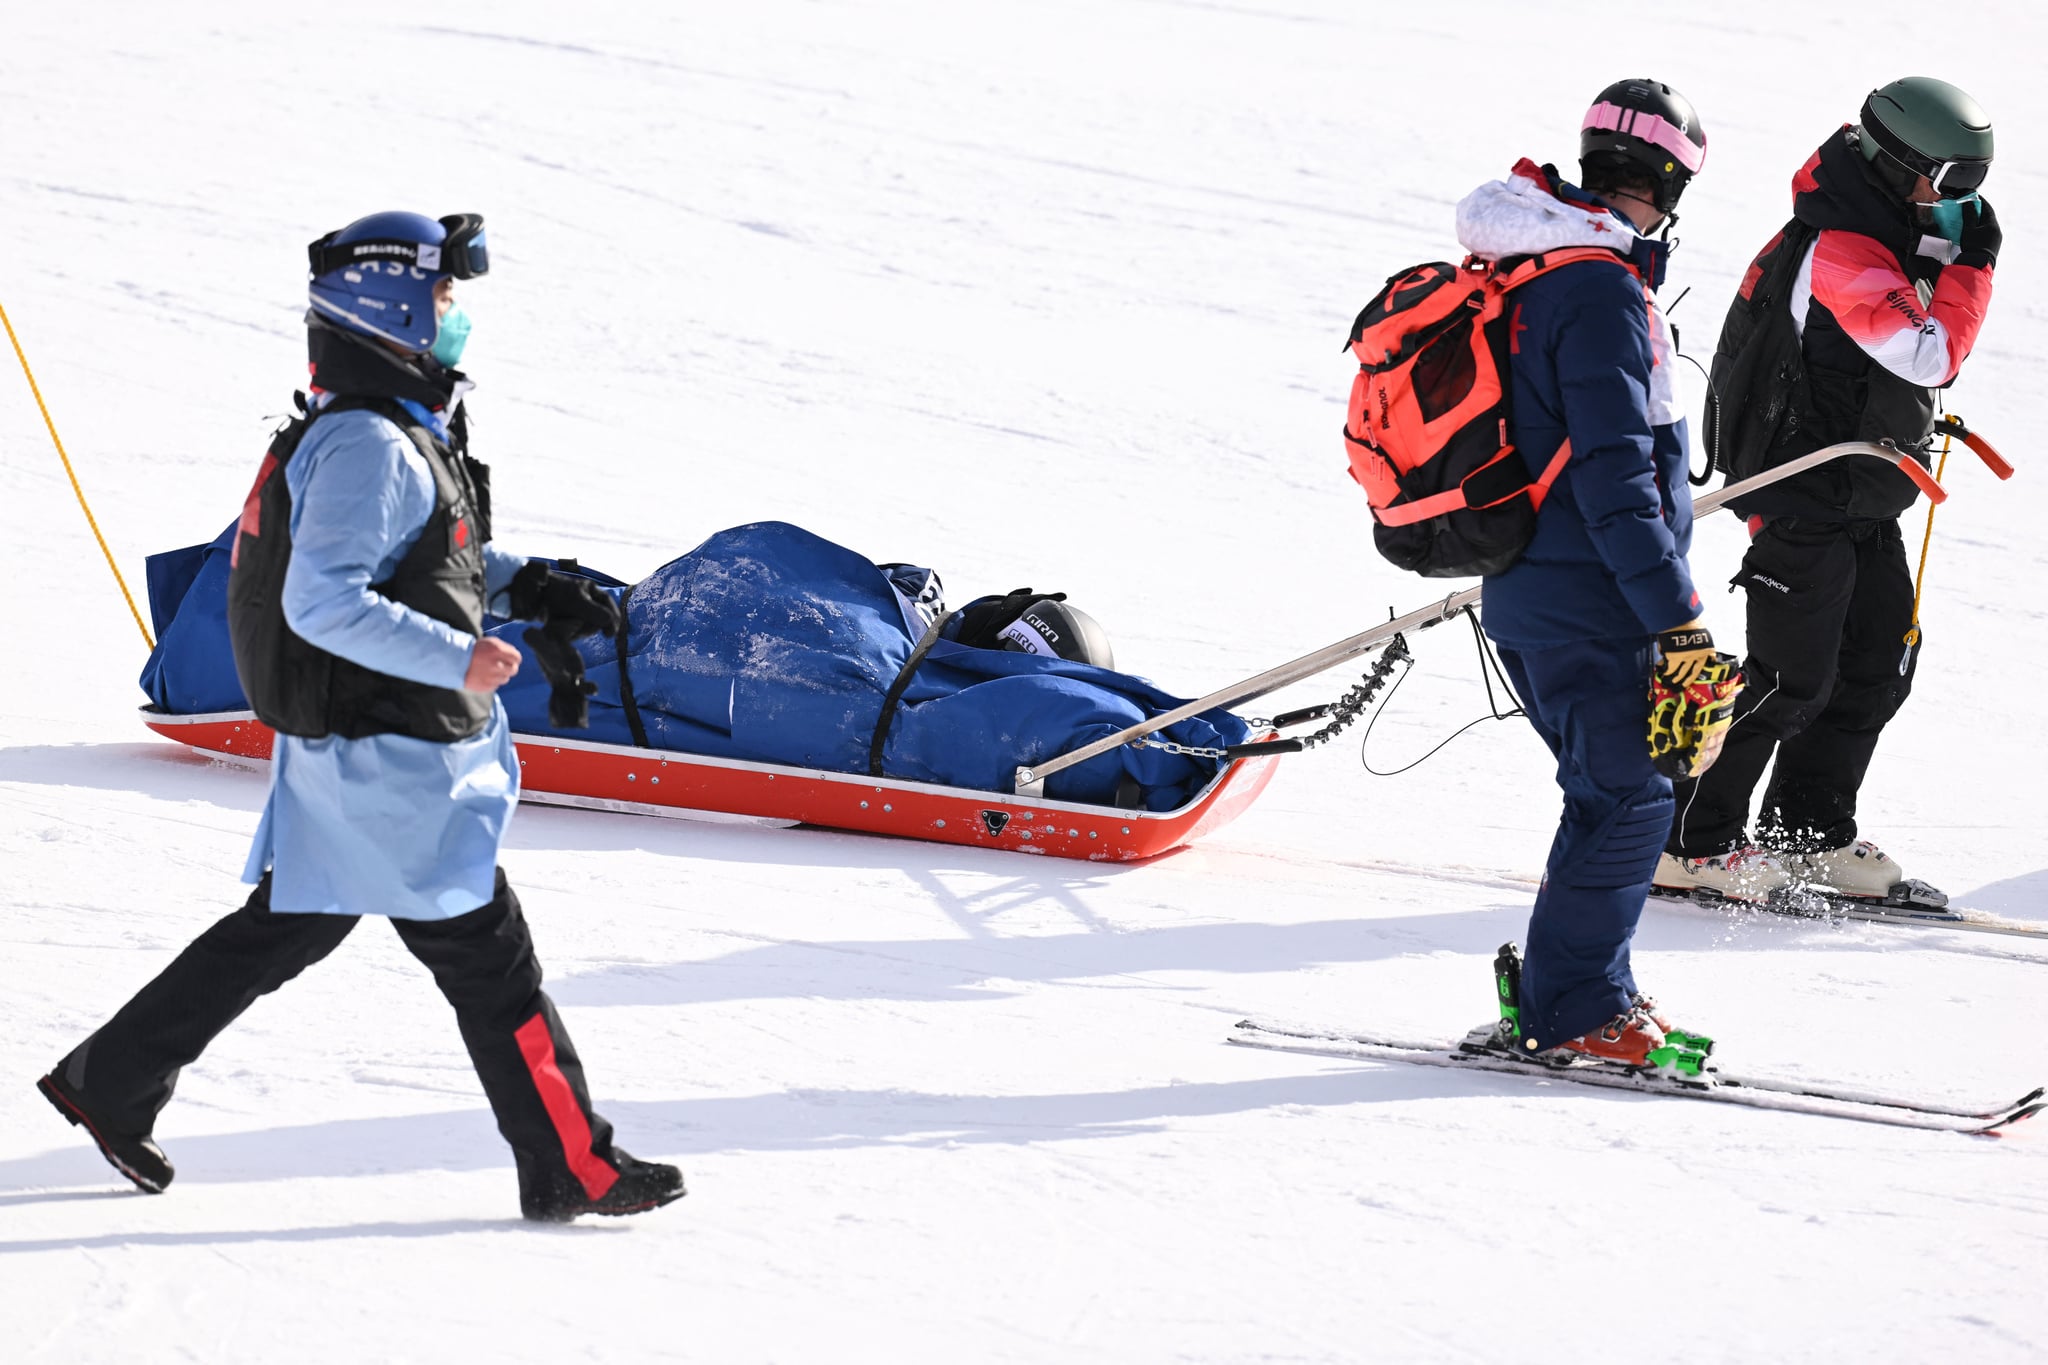 USA's Nina O'Brien (2nd L) is pulled away on a stretcher by medical staff after she crashed in the second run of the women's giant slalom during the Beijing 2022 Winter Olympic Games at the Yanqing National Alpine Skiing Centre in Yanqing on February 7, 2022. (Photo by Fabrice COFFRINI / AFP) (Photo by FABRICE COFFRINI/AFP via Getty Images)